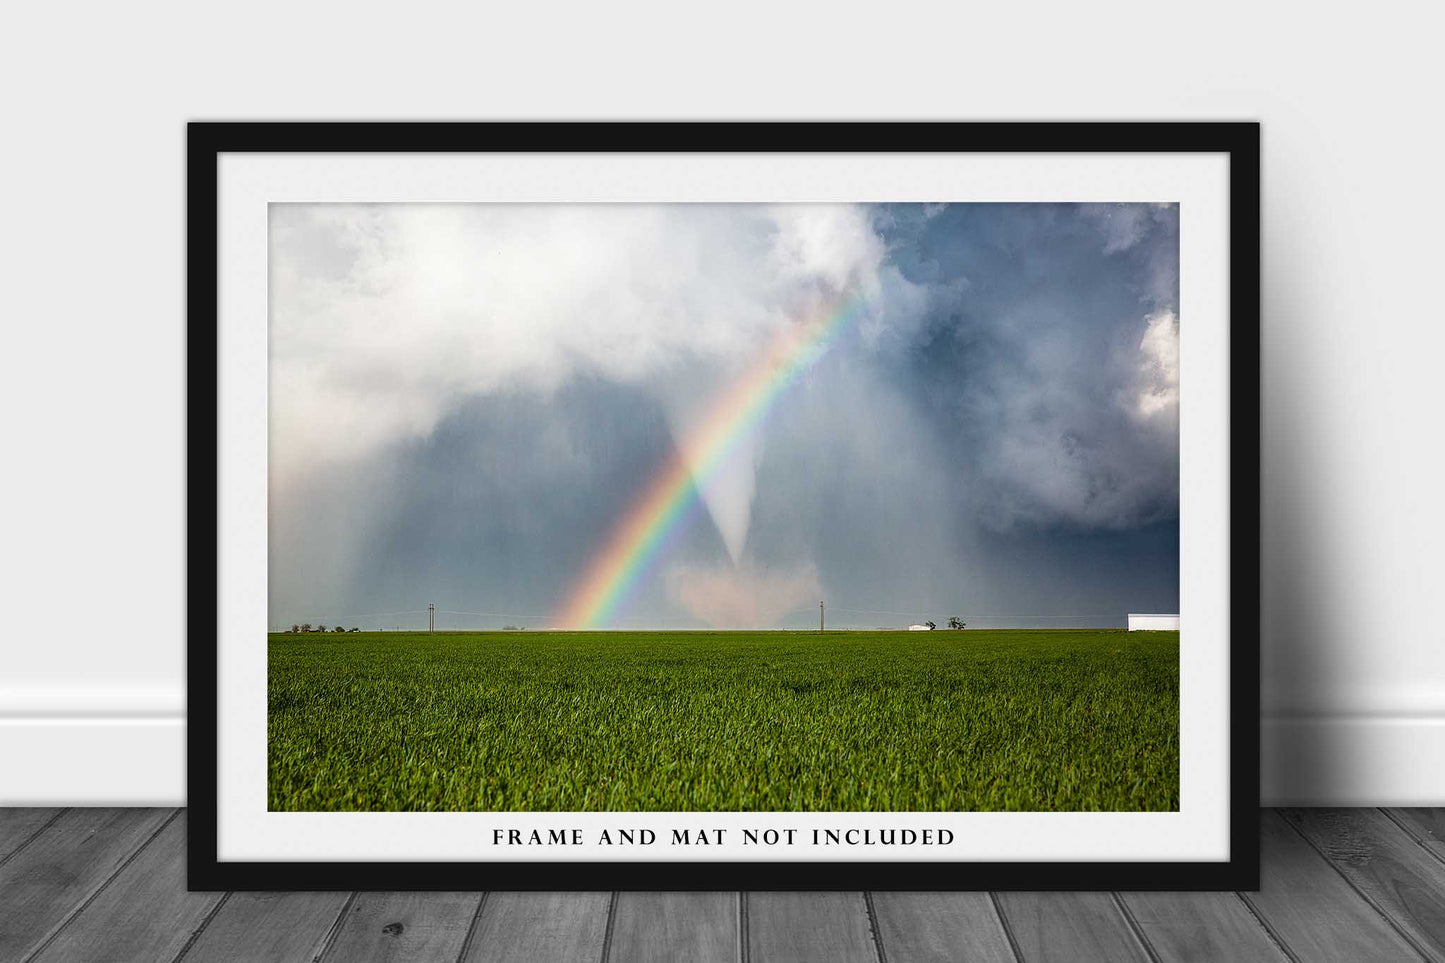 Storm Photography Print - Picture of Large Tornado Passing Through Rainbow on Stormy Spring Day in Texas - Nature Wall Art Weather Decor